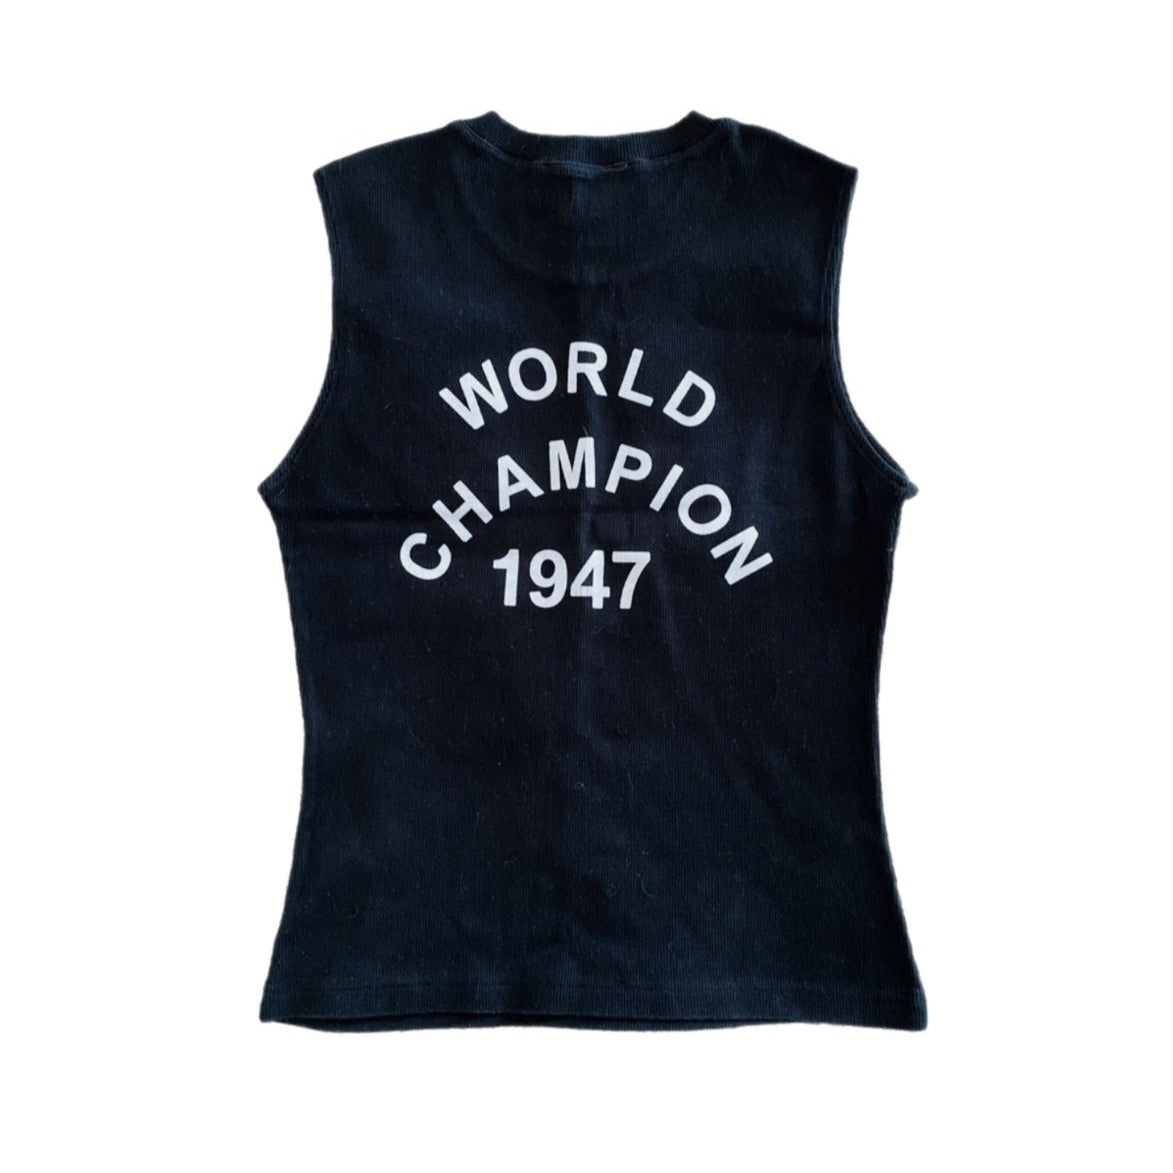 Champion elegance with J'adore Dior 1947 World Champion Top. Embrace iconic style and elevate your fashion game .